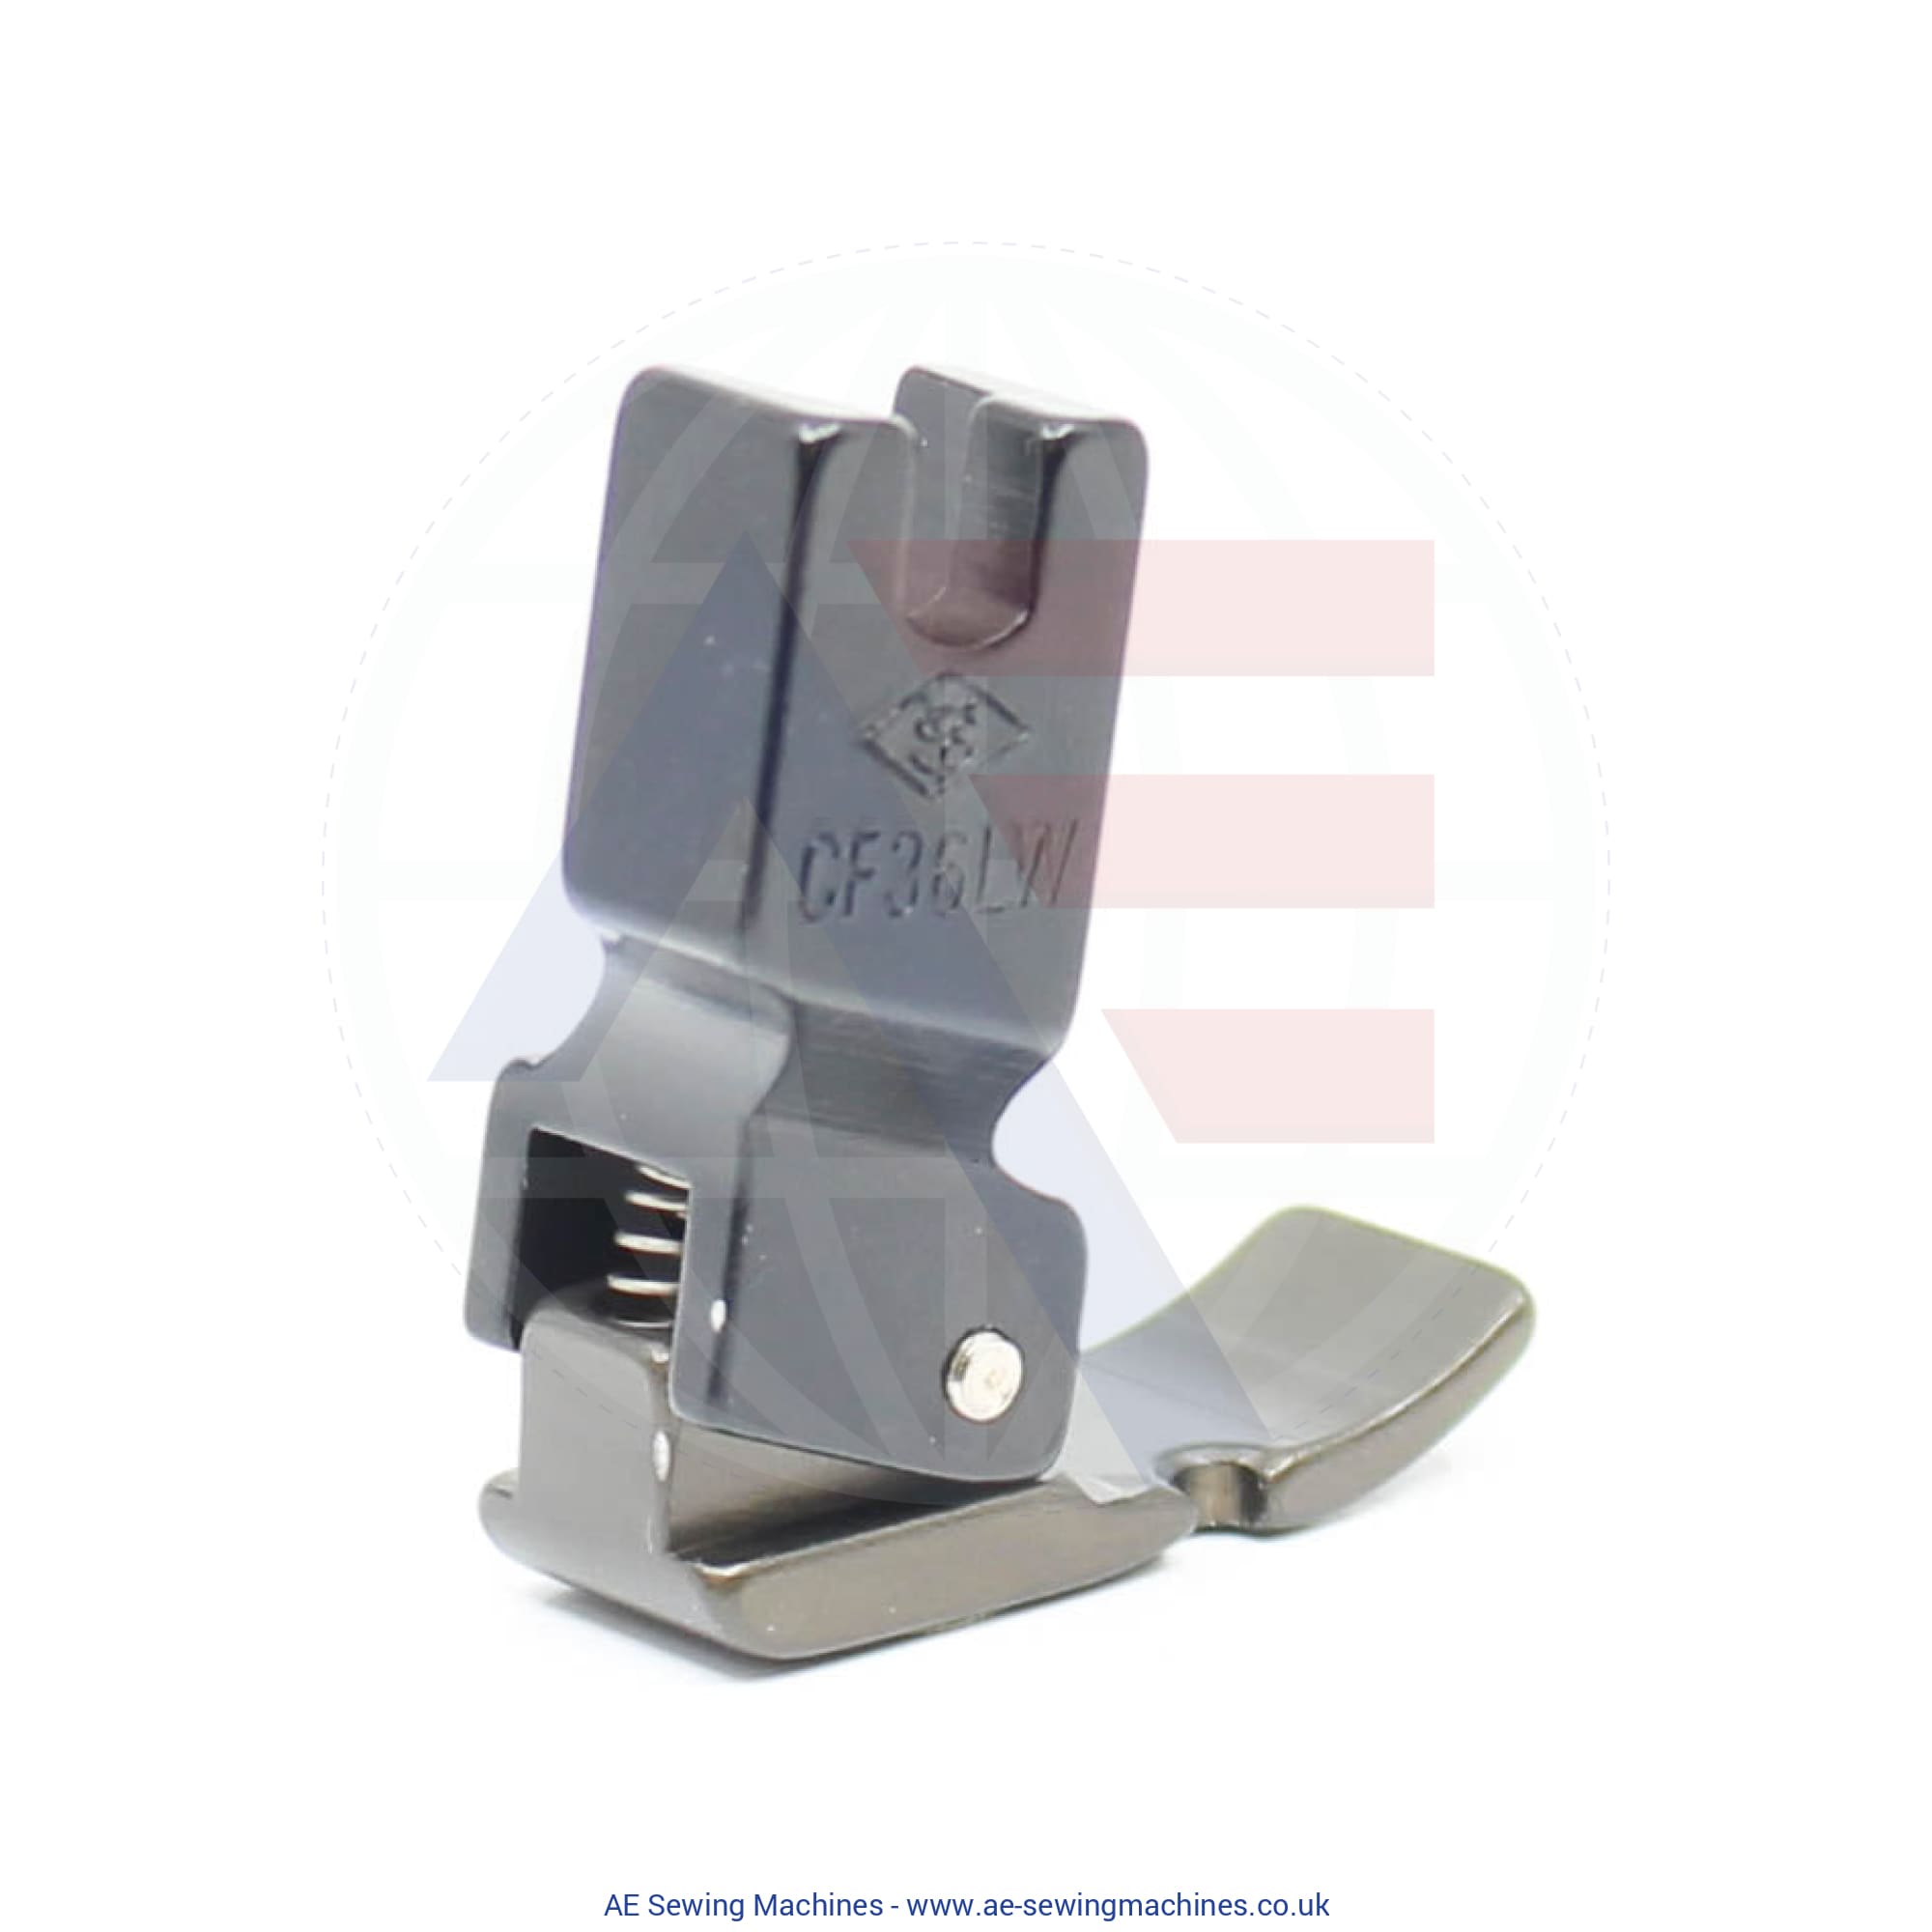 Cf36-Lw Foot Sewing Machine Spare Parts